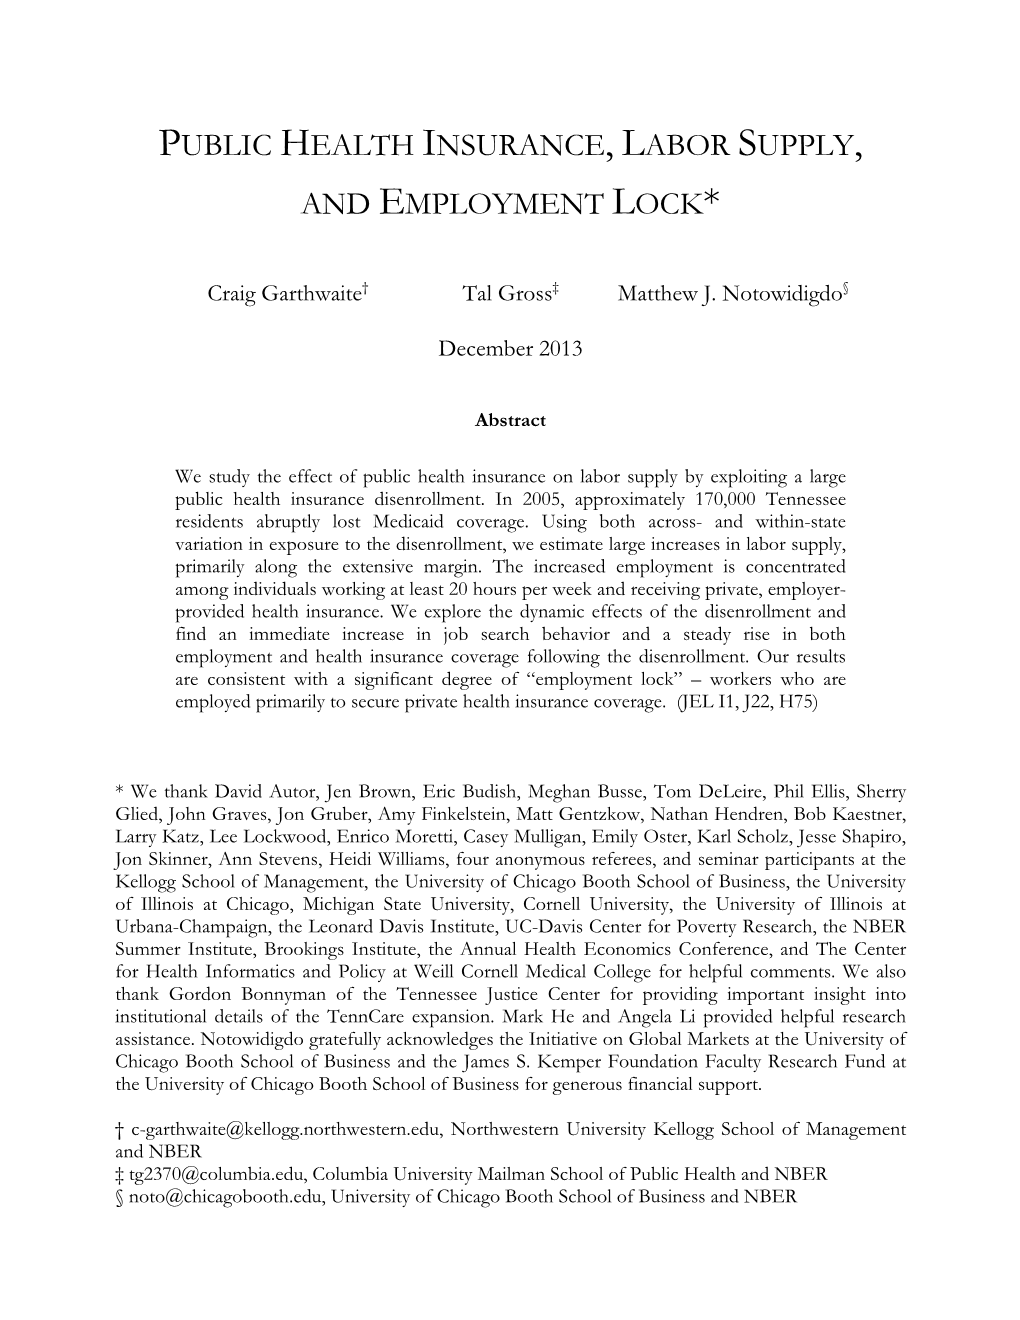 Public Health Insurance, Labor Supply, and Employment Lock*